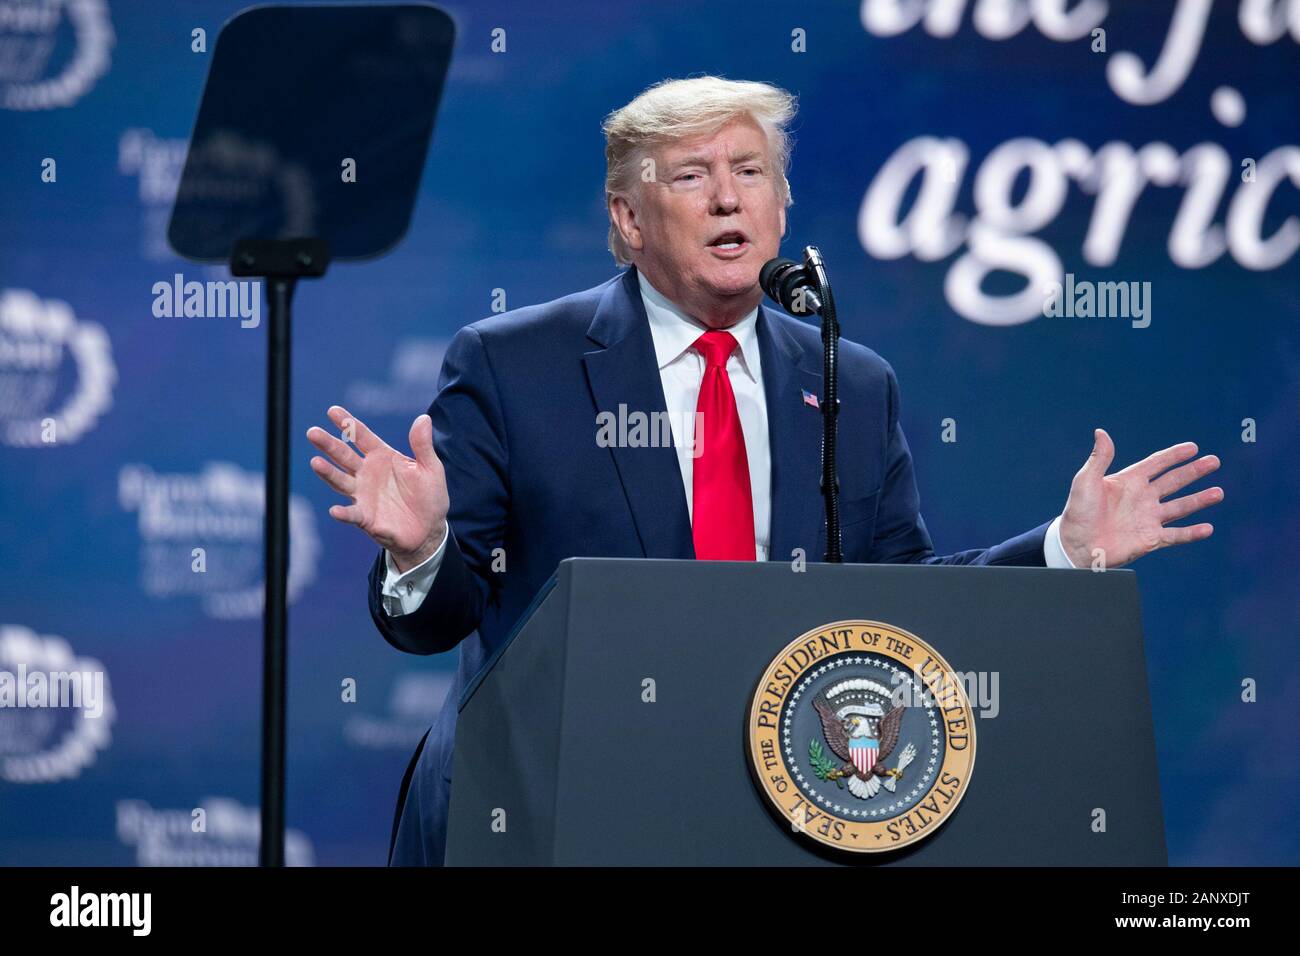 United States President Donald J. Trump speaks before 5,000 attendees at the annual American Farm Bureau Federation convention in Austin, Texas, USA. Stock Photo